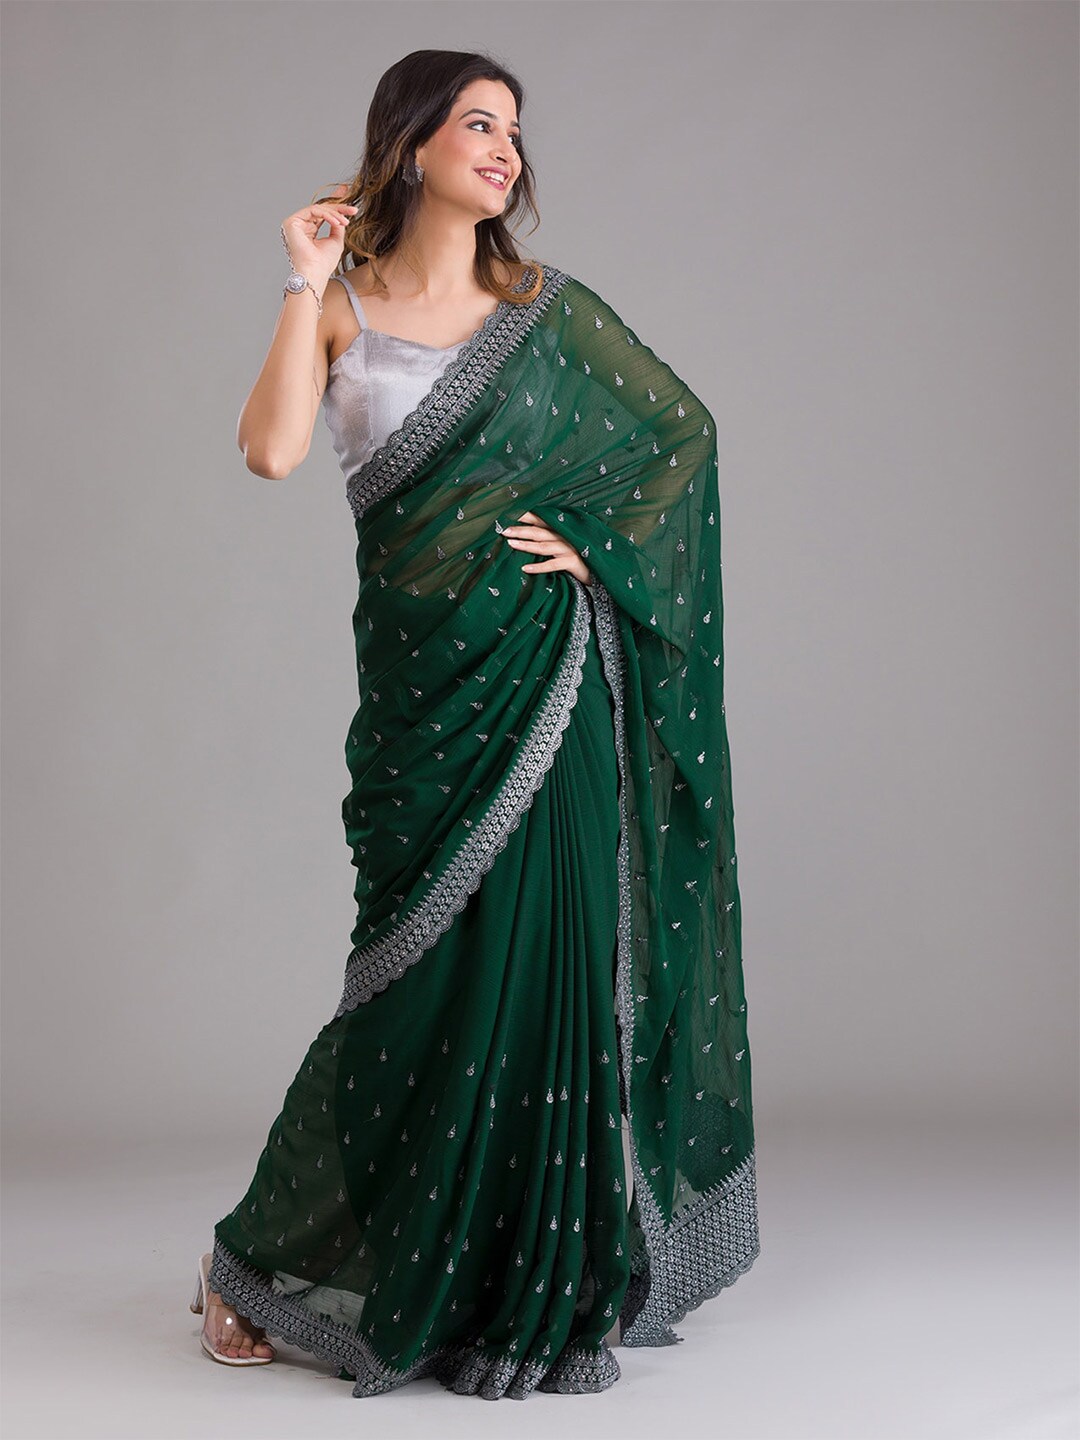 Koskii Green & Silver-Toned Embellished Beads and Stones Heavy Work Saree Price in India